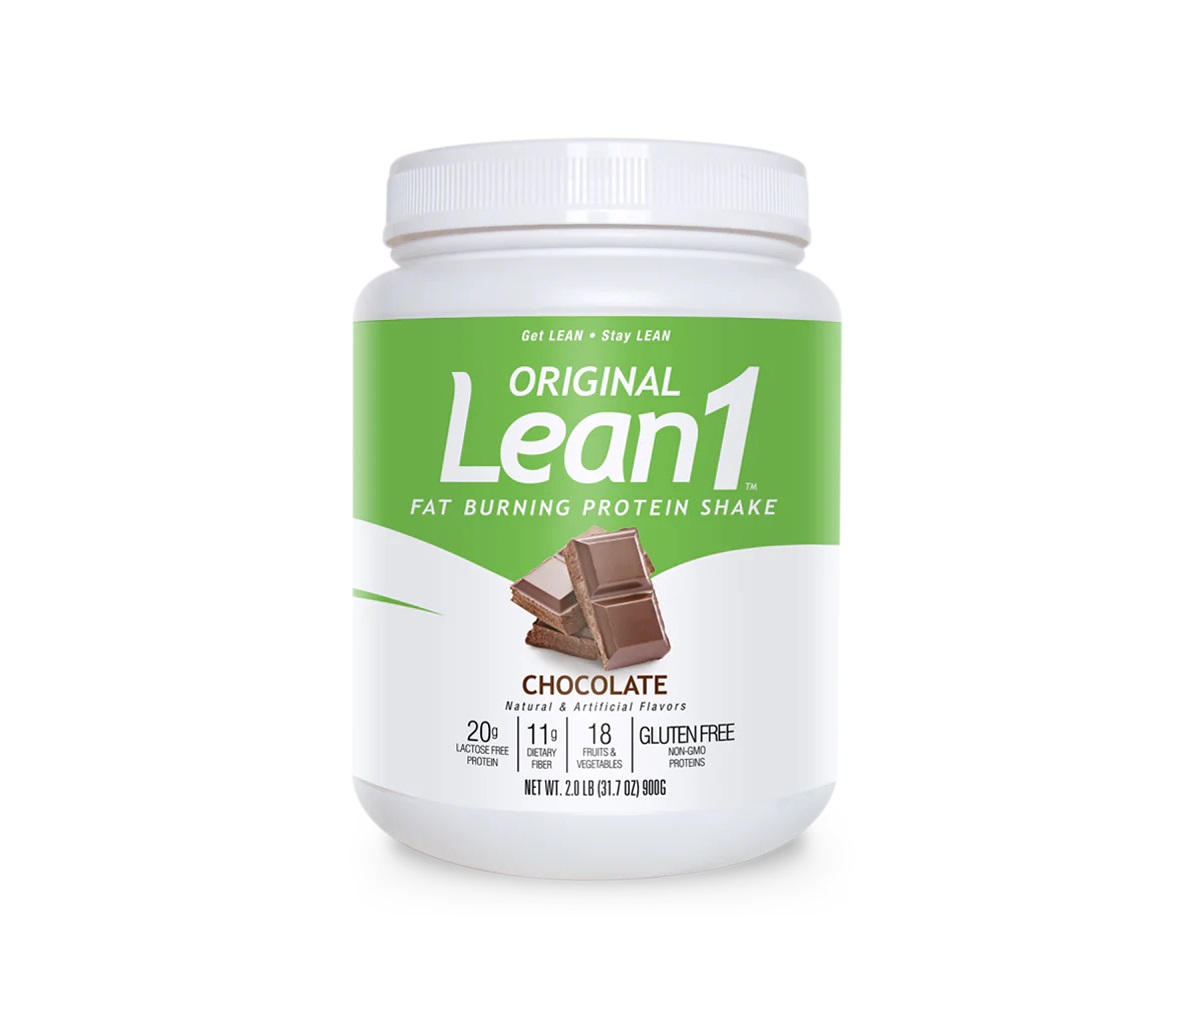 20-lean-1-protein-powder-nutrition-facts